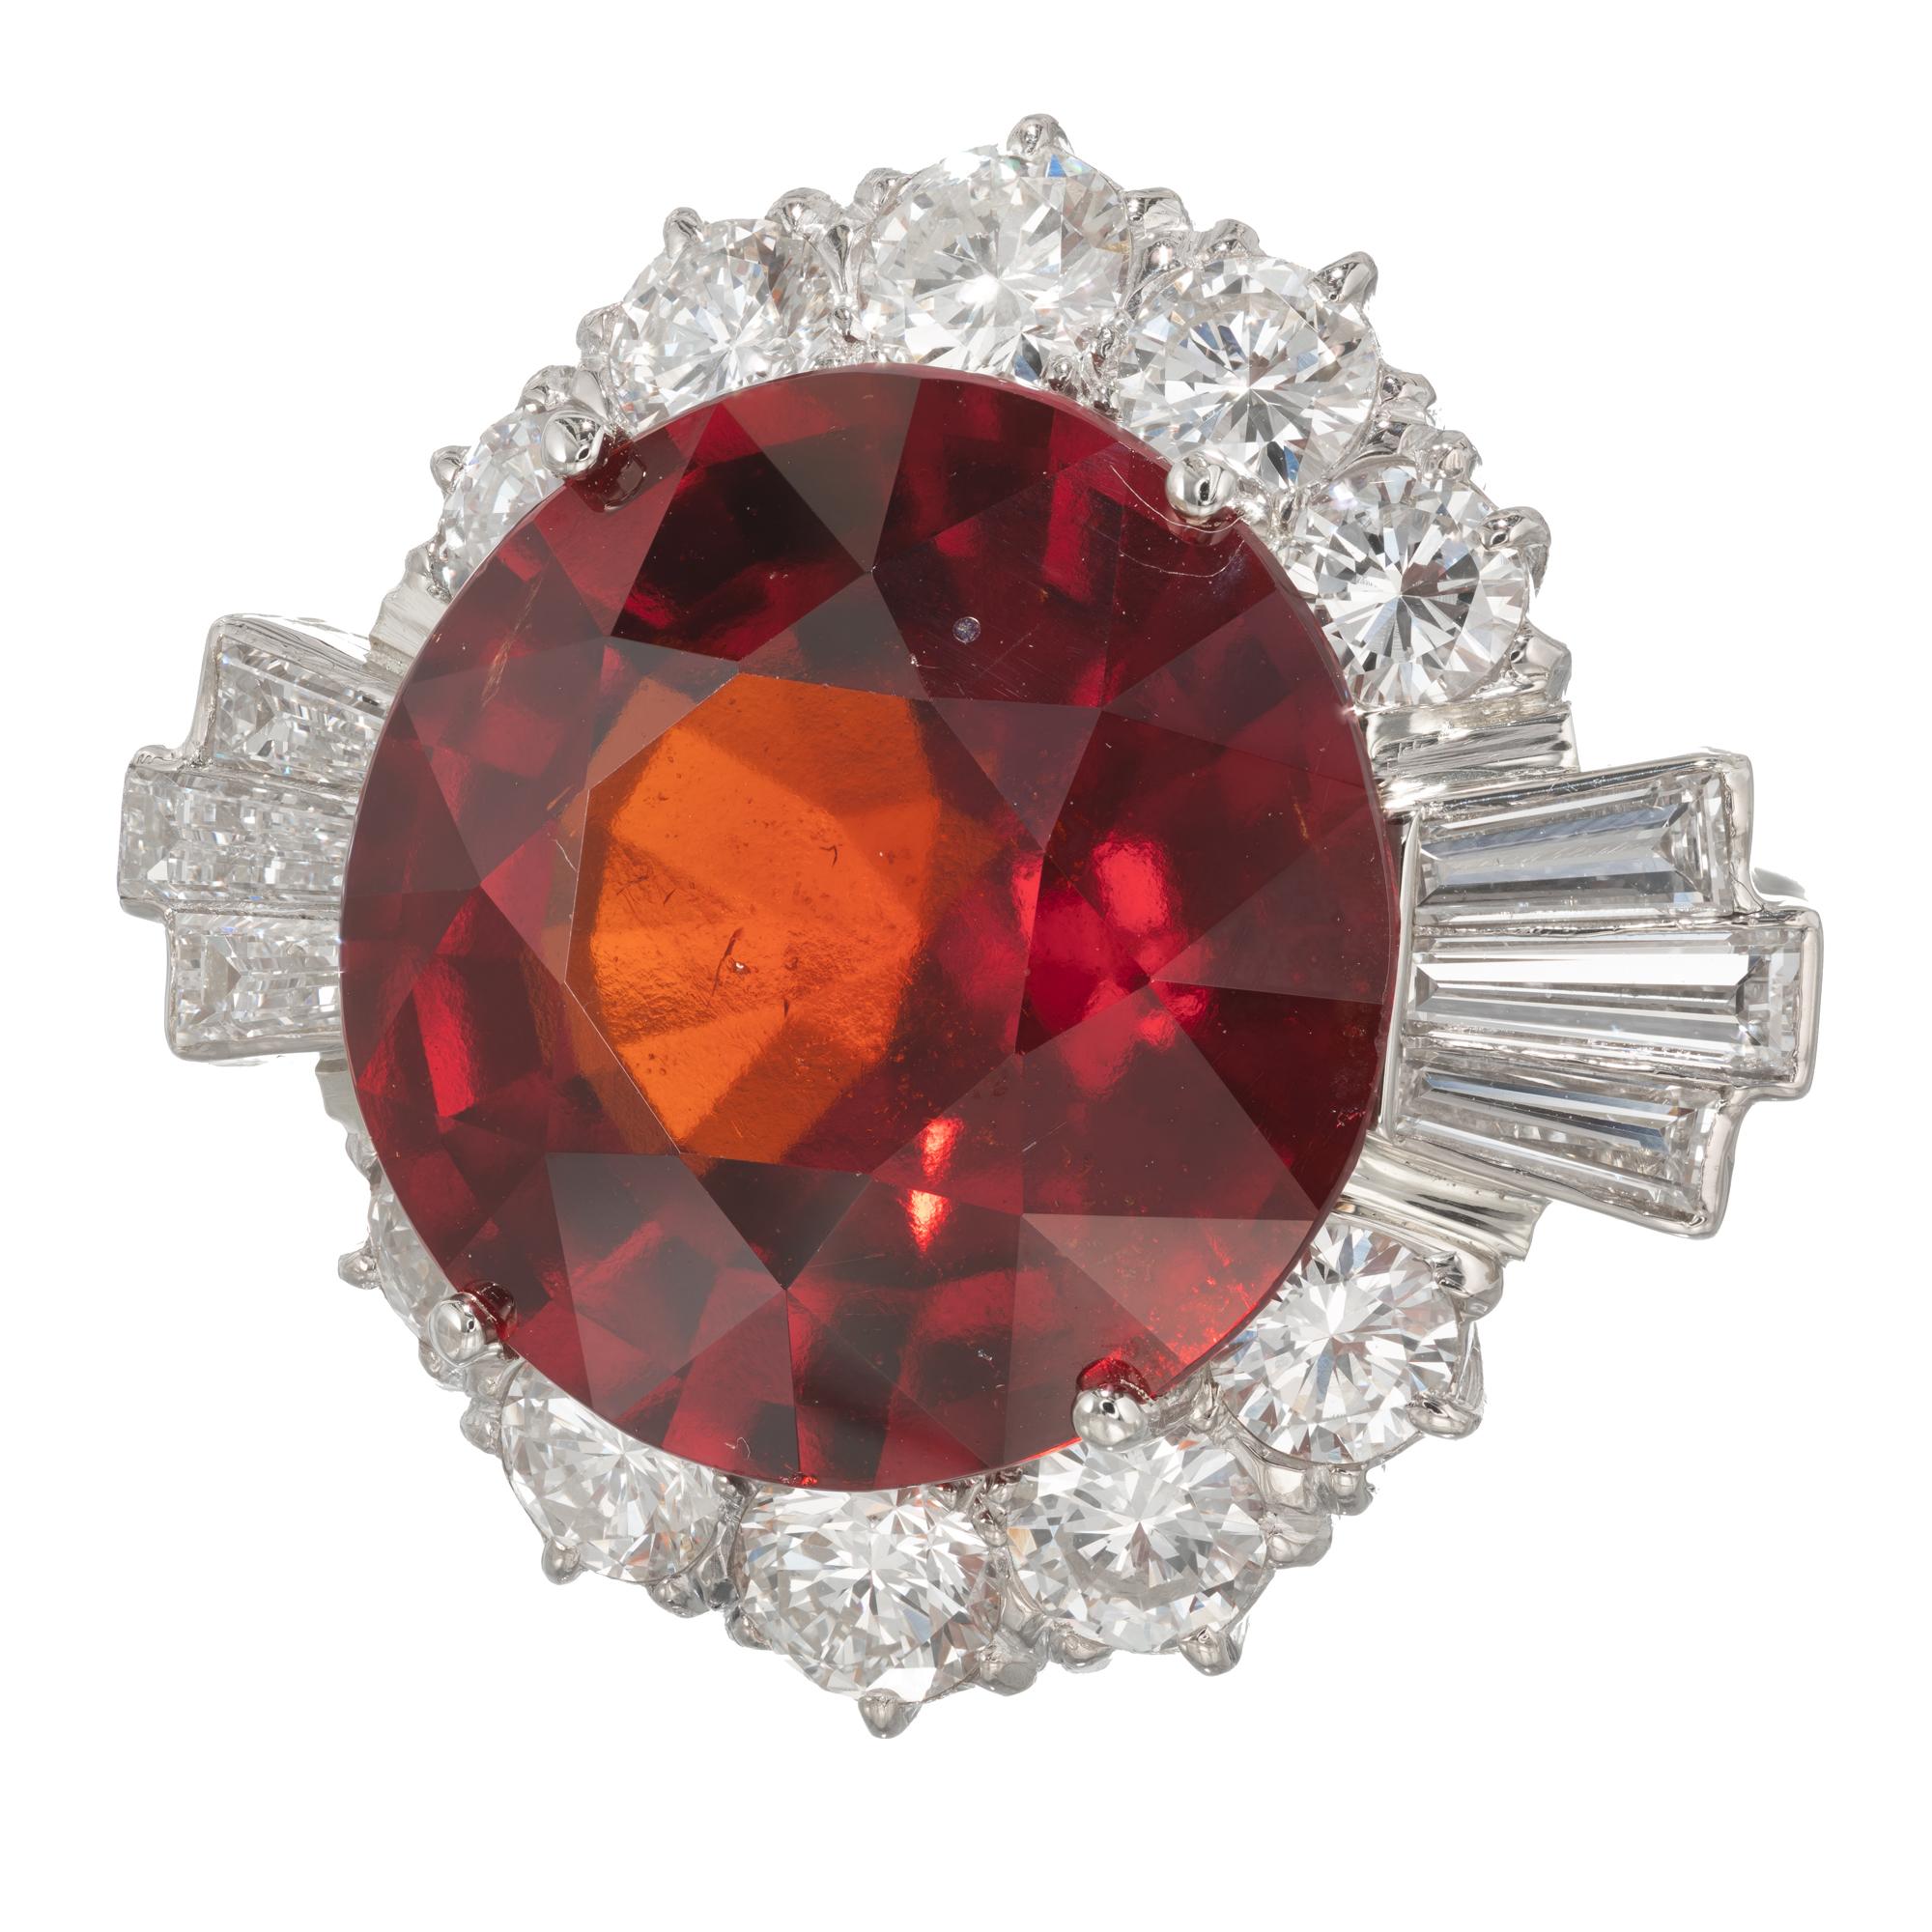 1950's GIA certified natural 20.28ct round reddish orange Hessonite Garnet iand diamond halo cocktail ring. 18k white gold setting with a halo of  round and baguette diamonds. 

1 round reddish orange Hessonite Garnet, approx. total weight 20.28cts,